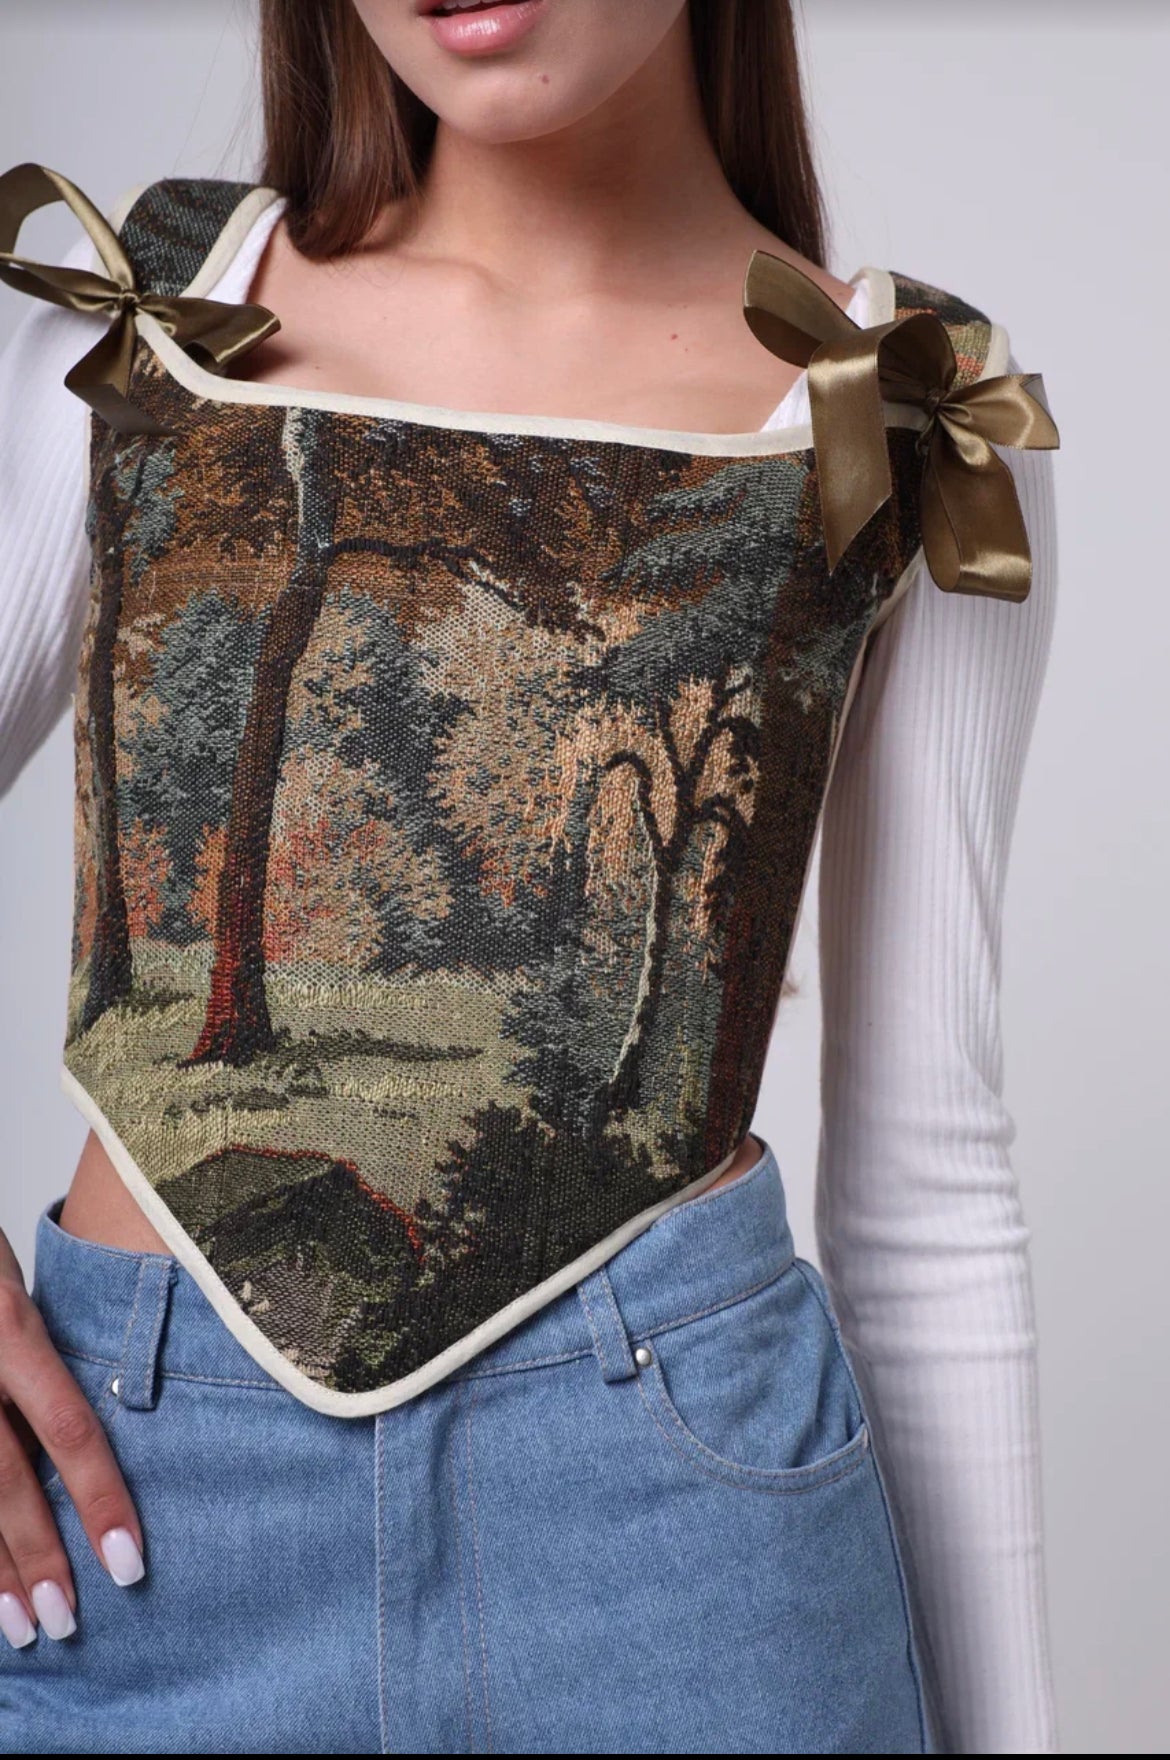 NEW Lace-up Vintage Tapestry Corset Top, "Scenic Woods” Print, Size XS-S (US 0-4)